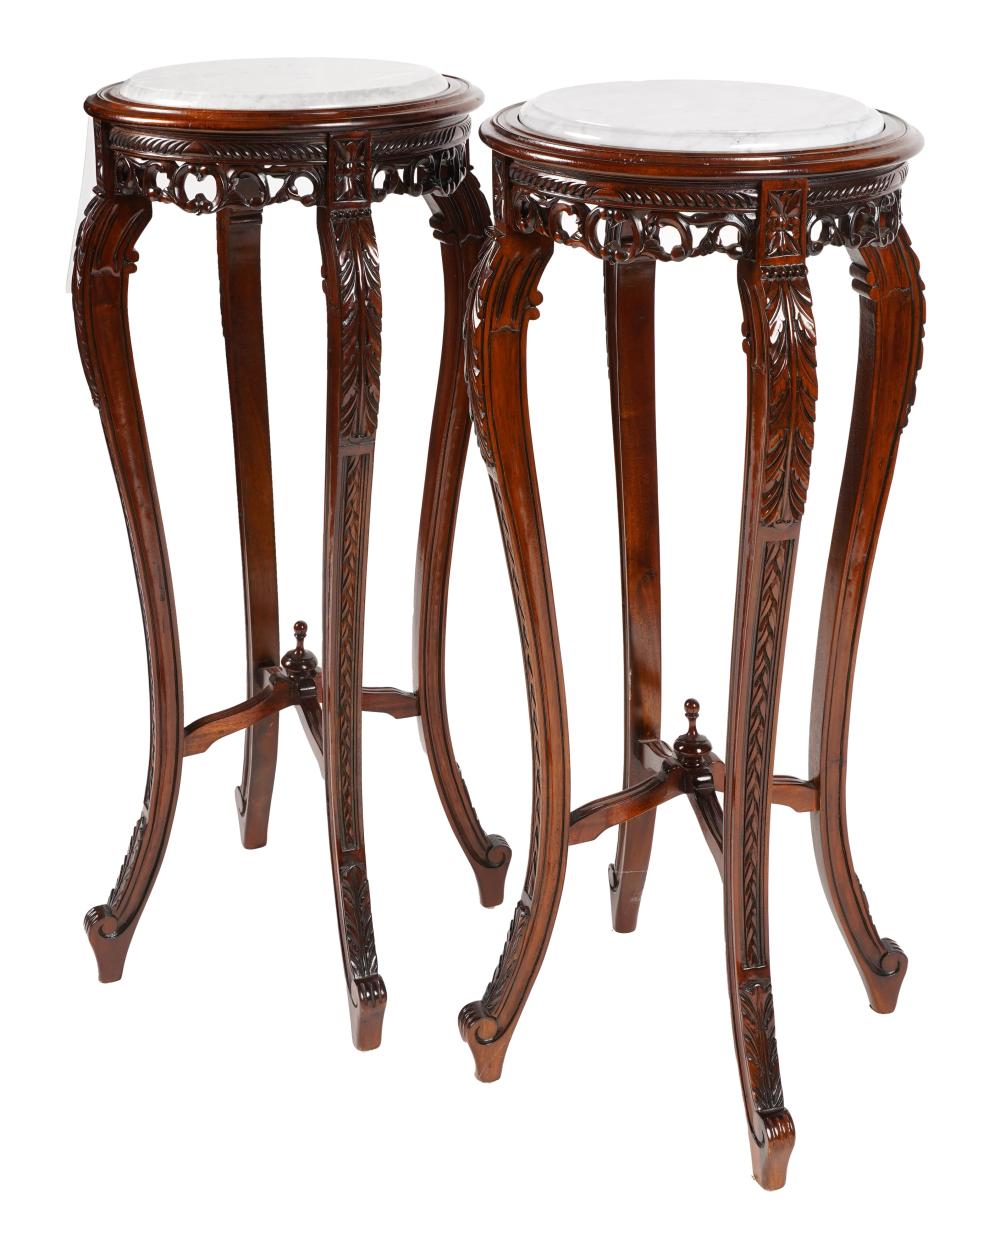 PAIR OF CARVED MAHOGANY STANDSeach 30088d